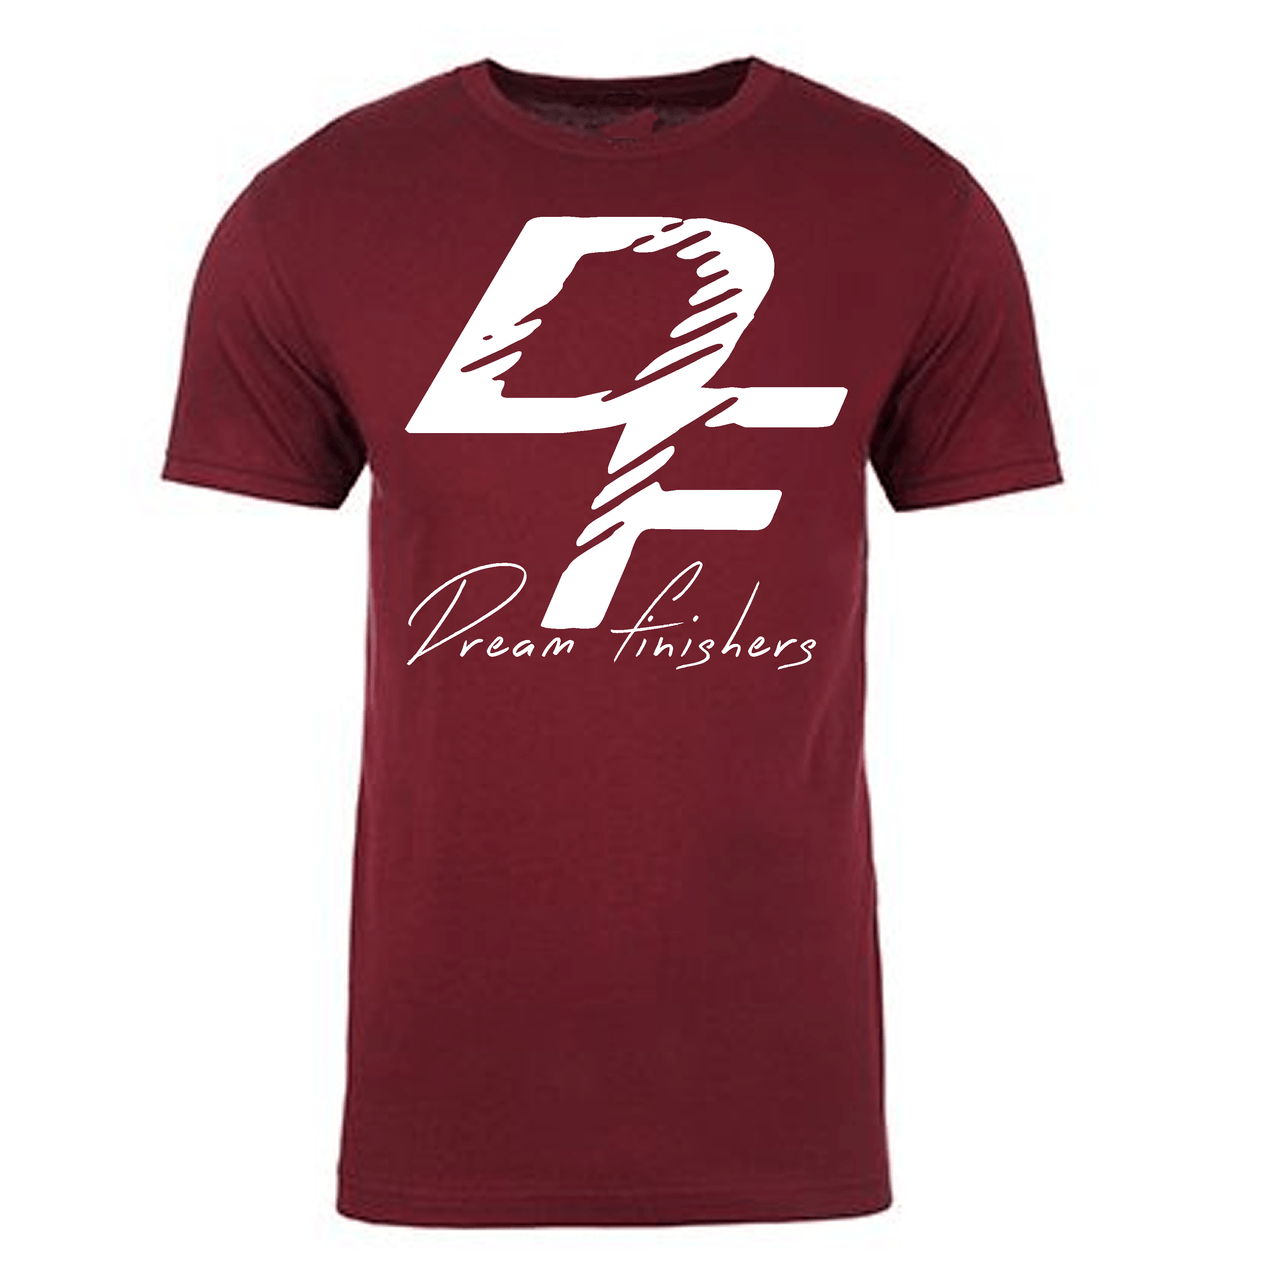 Maroon and White Logo - Dream Finishers Maroon shirt with white DF logo